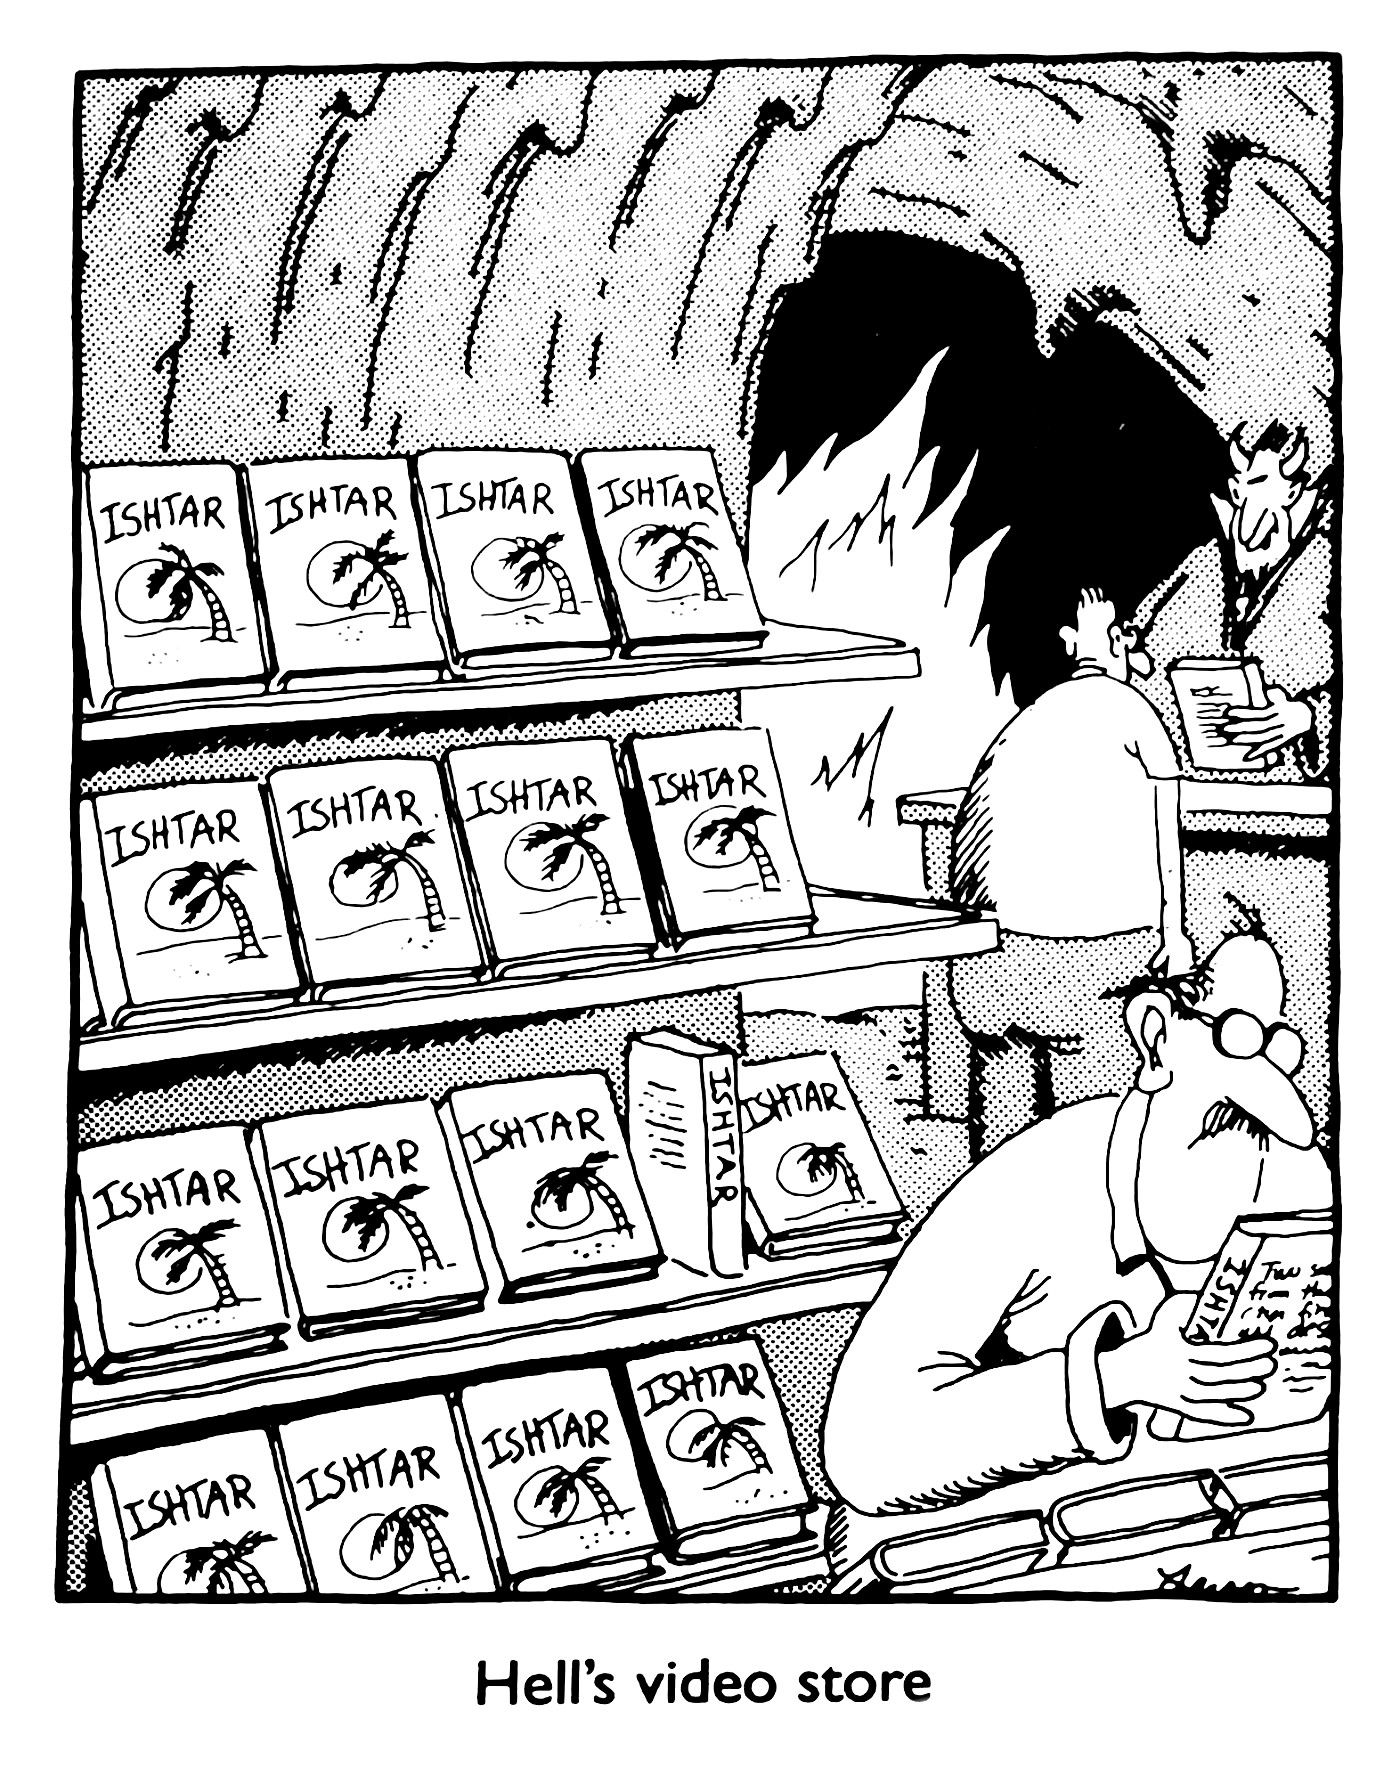 far side hell's video store only contains ishtar 3